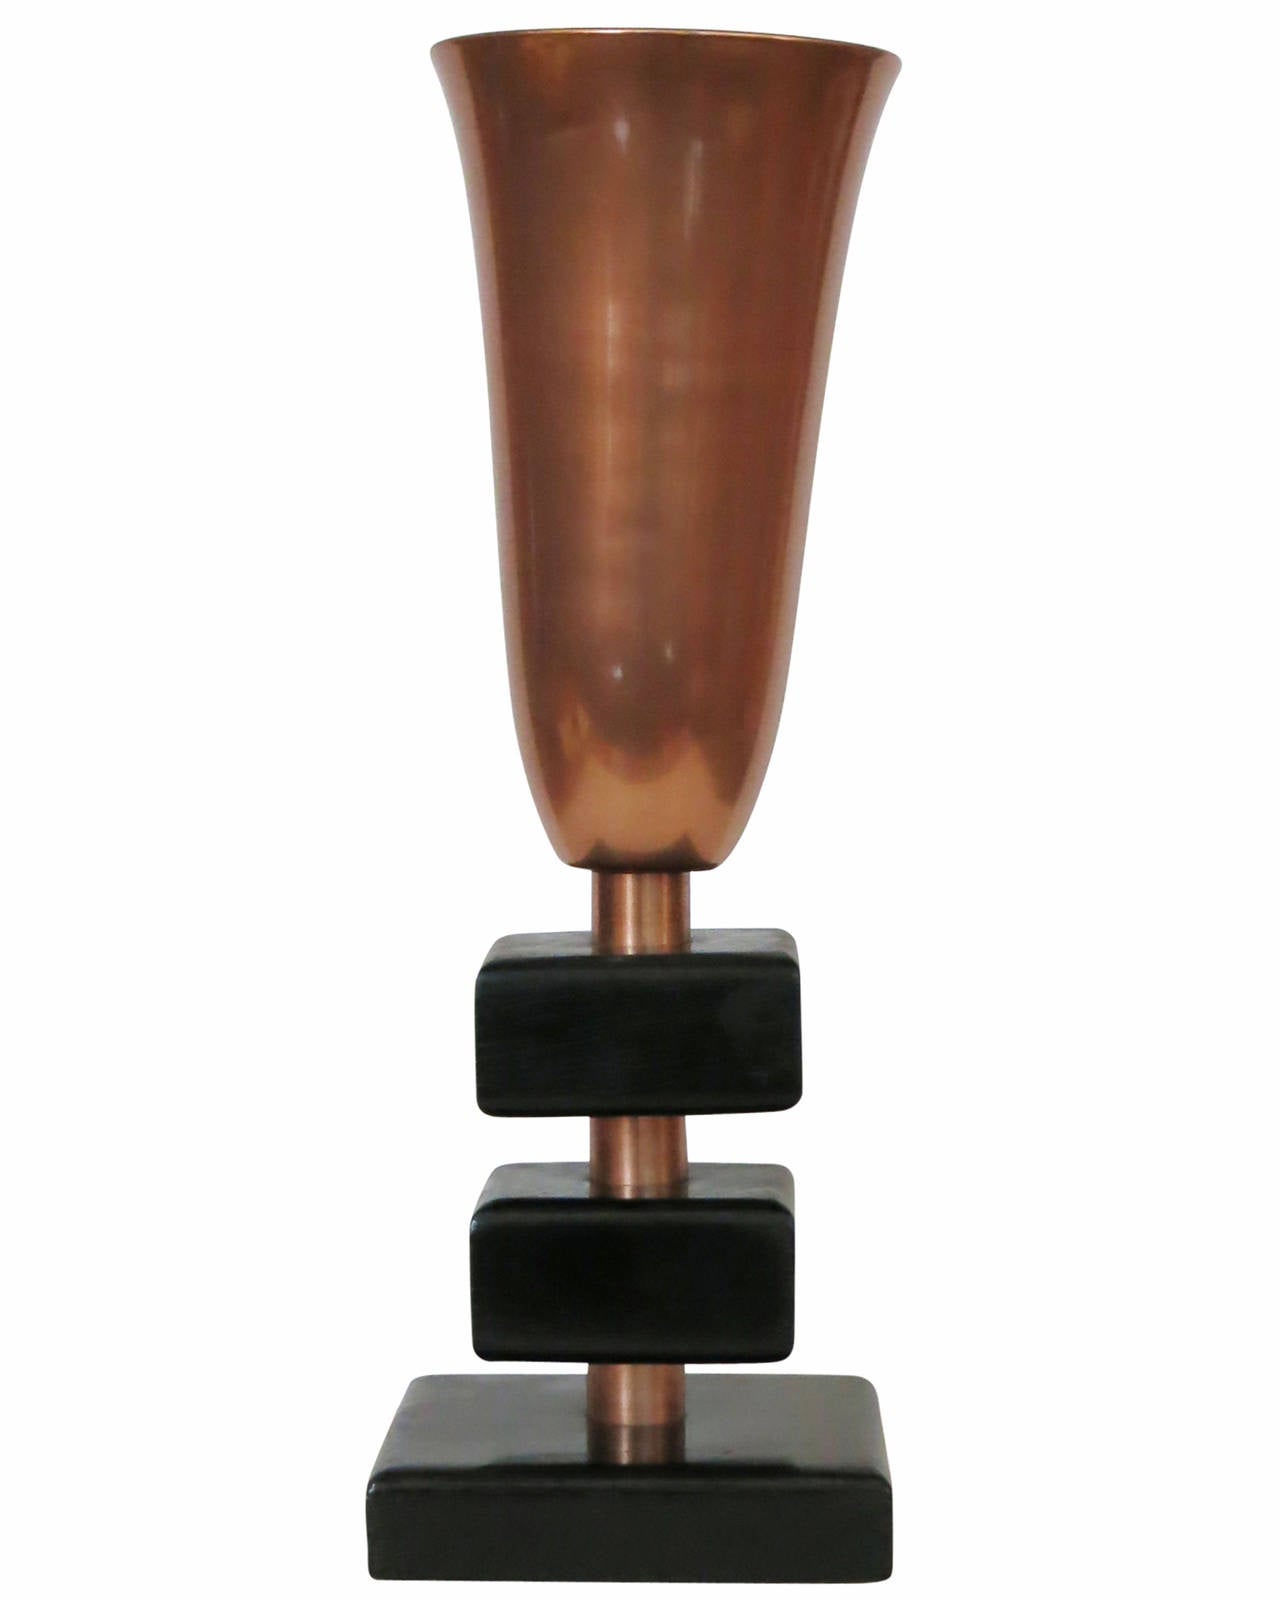 A late 1940s copper torchiere table lamp, featuring a slender copper torchiere lamp shade and stacked base made of lacquered wood steps with decorative copper links. 

This lamp is a great example of early Postwar midcentury design!